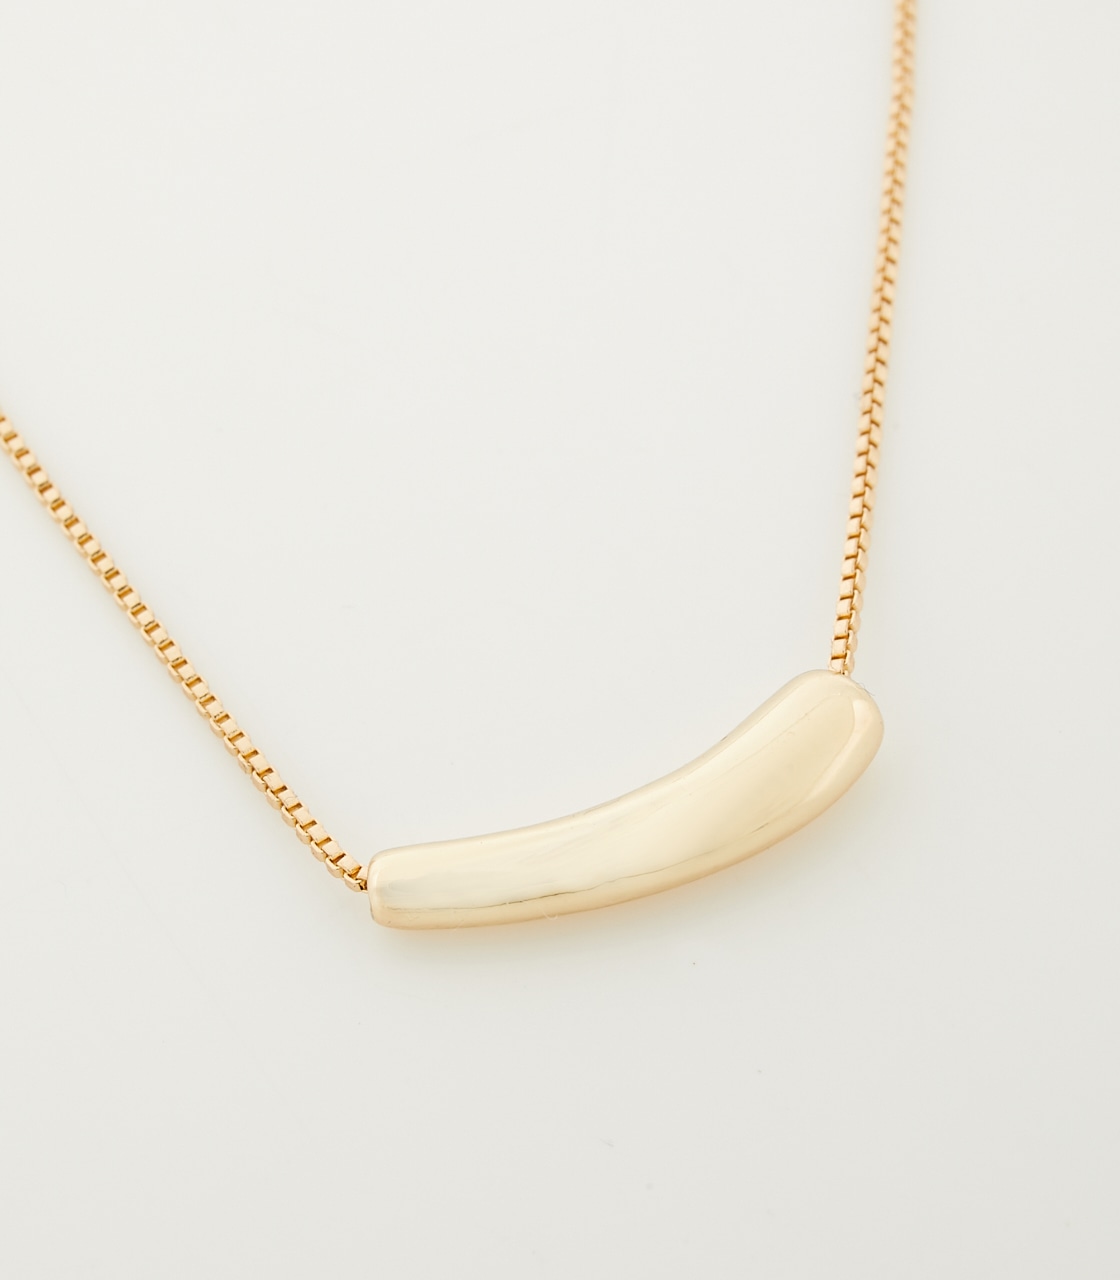 SIMPLE POLE NECKLACE/シンプルポールネックレス 詳細画像 L/GLD 3